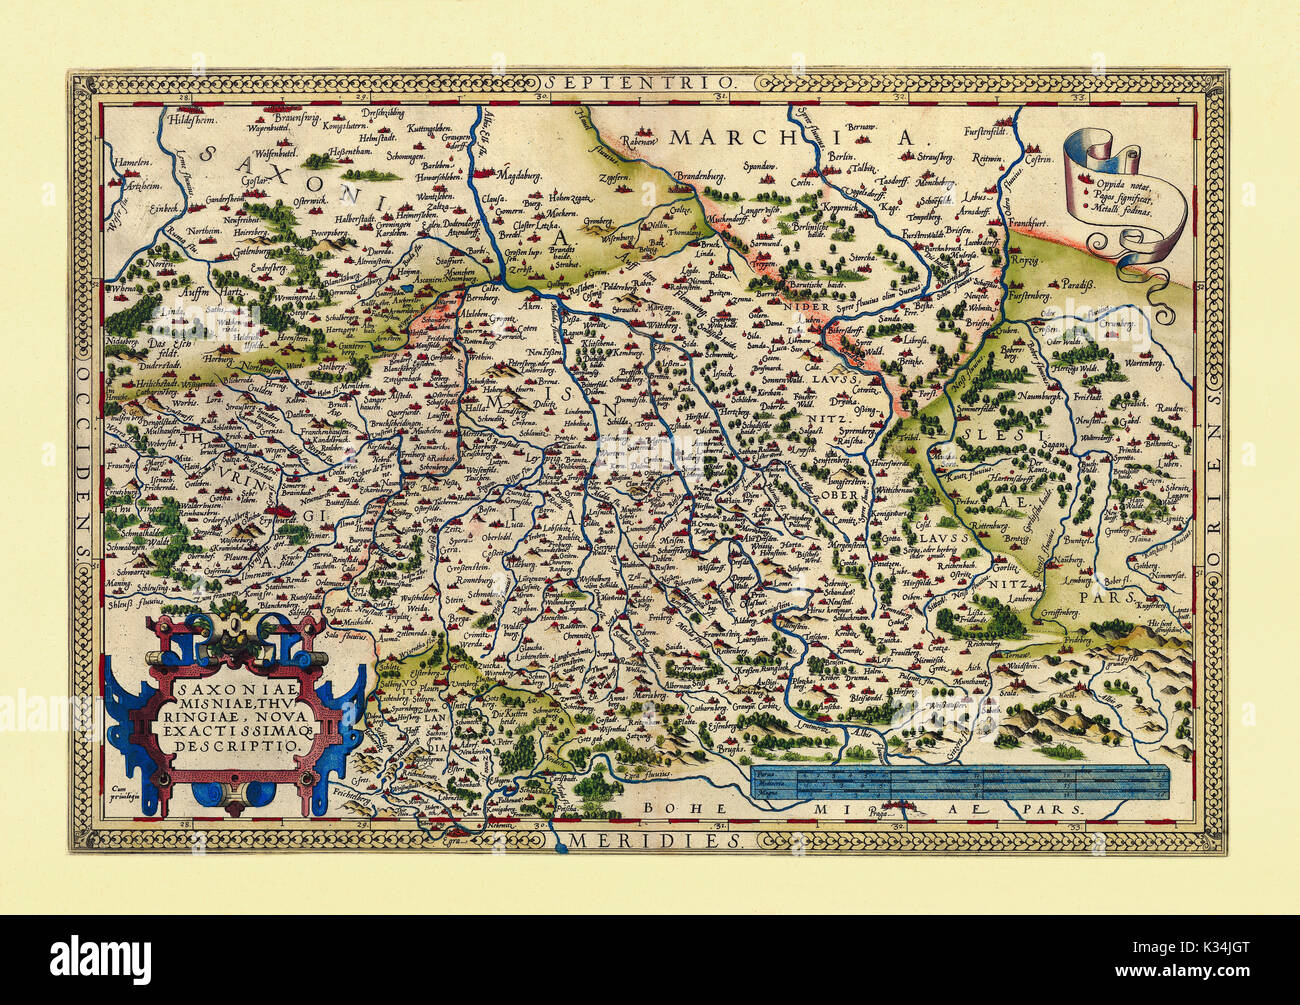 Old map of Thuringia and Saxony. Excellent state of preservation realized in ancient style. All the graphic composition is inside a frame. By Ortelius, Theatrum Orbis Terrarum, Antwerp, 1570 Stock Photo